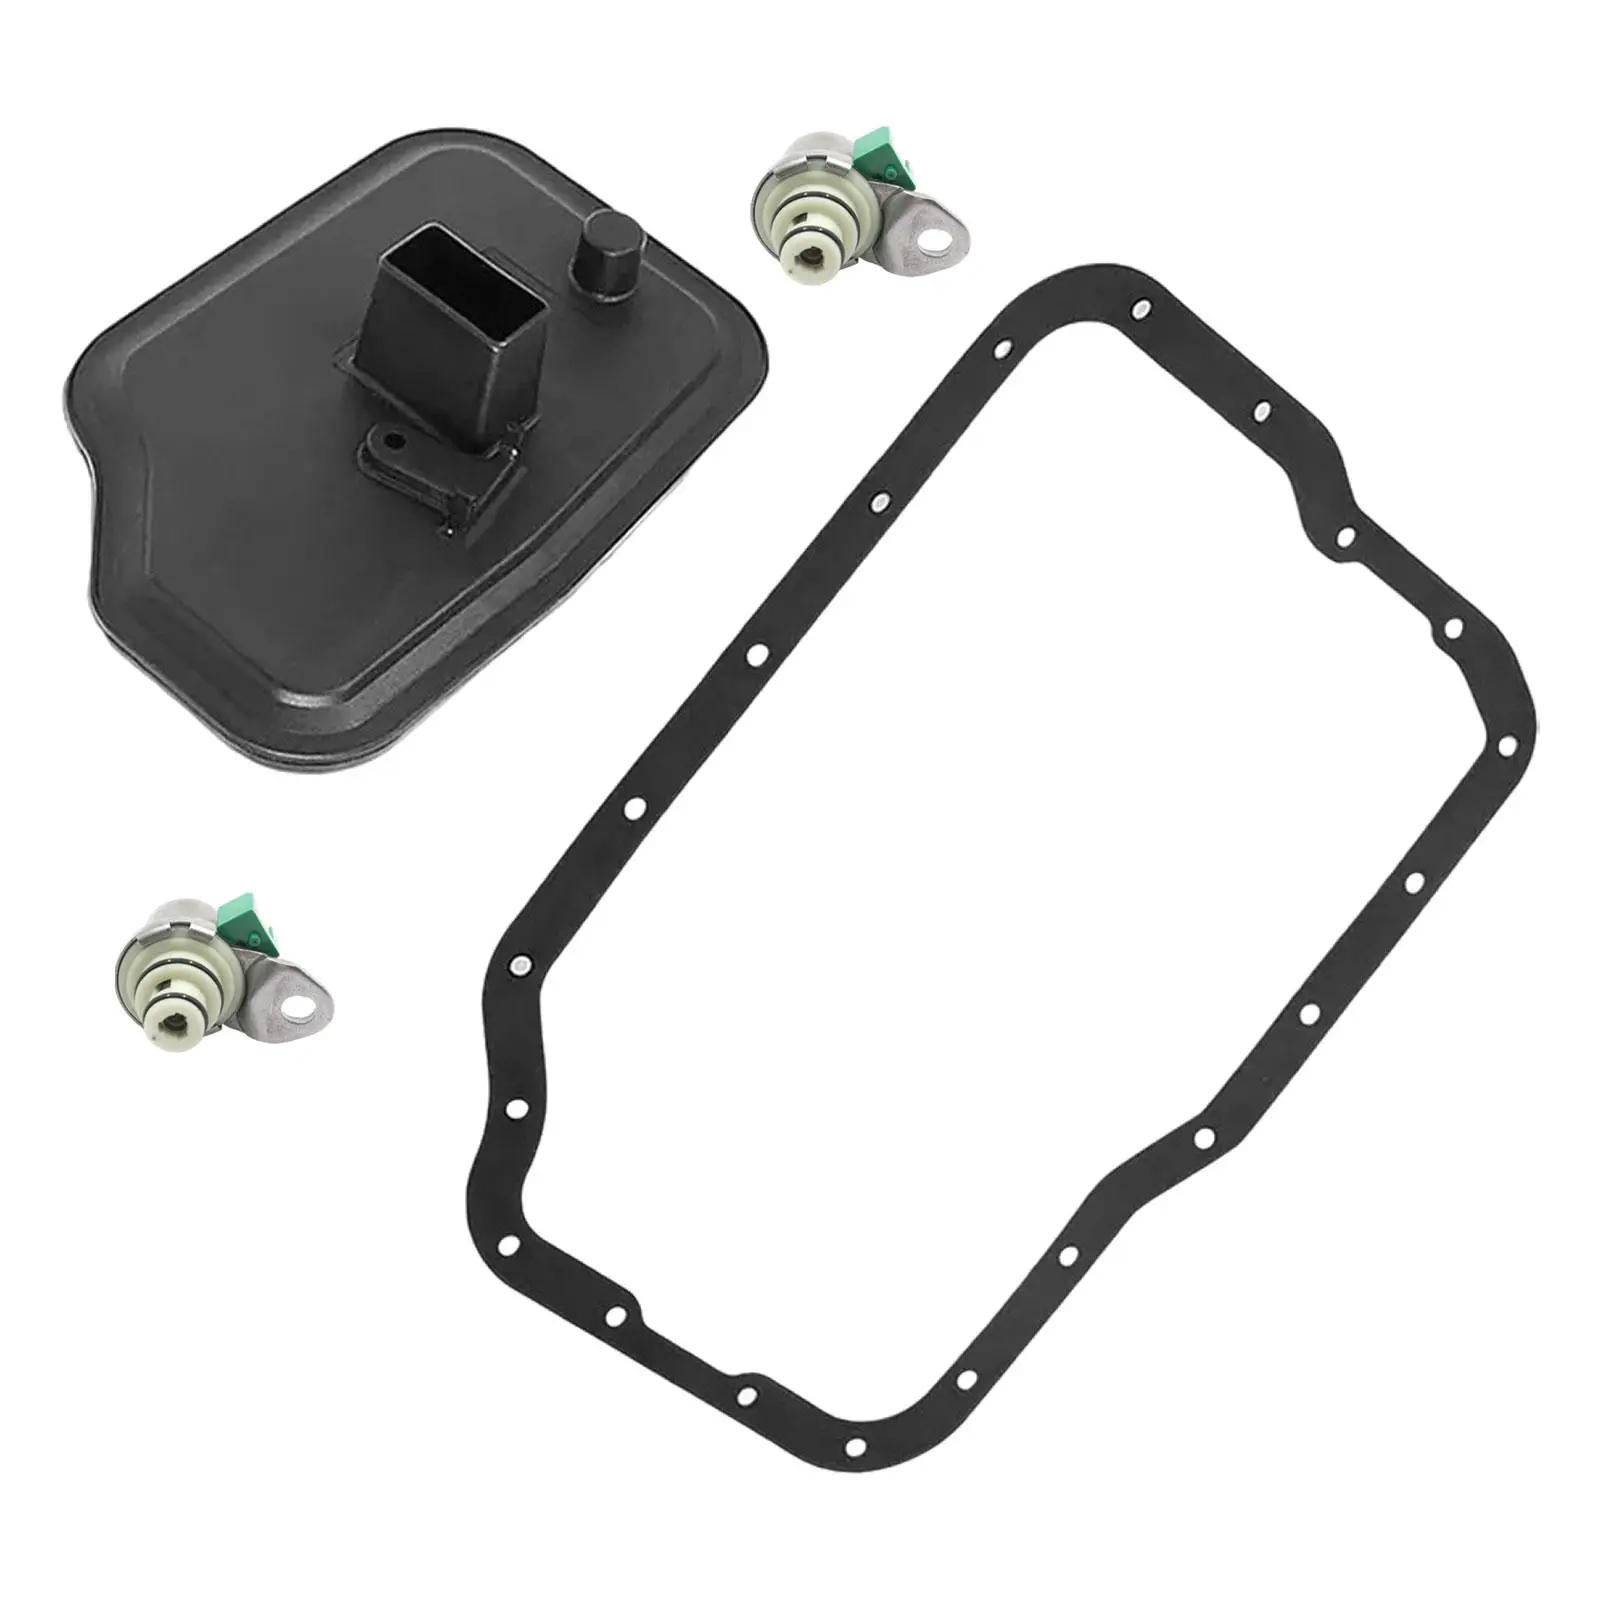 Transmission Filter Pan Gasket Kit with Filter Gasket Accessory for Ford Mazda Convenient Installation Sturdy Spare Parts